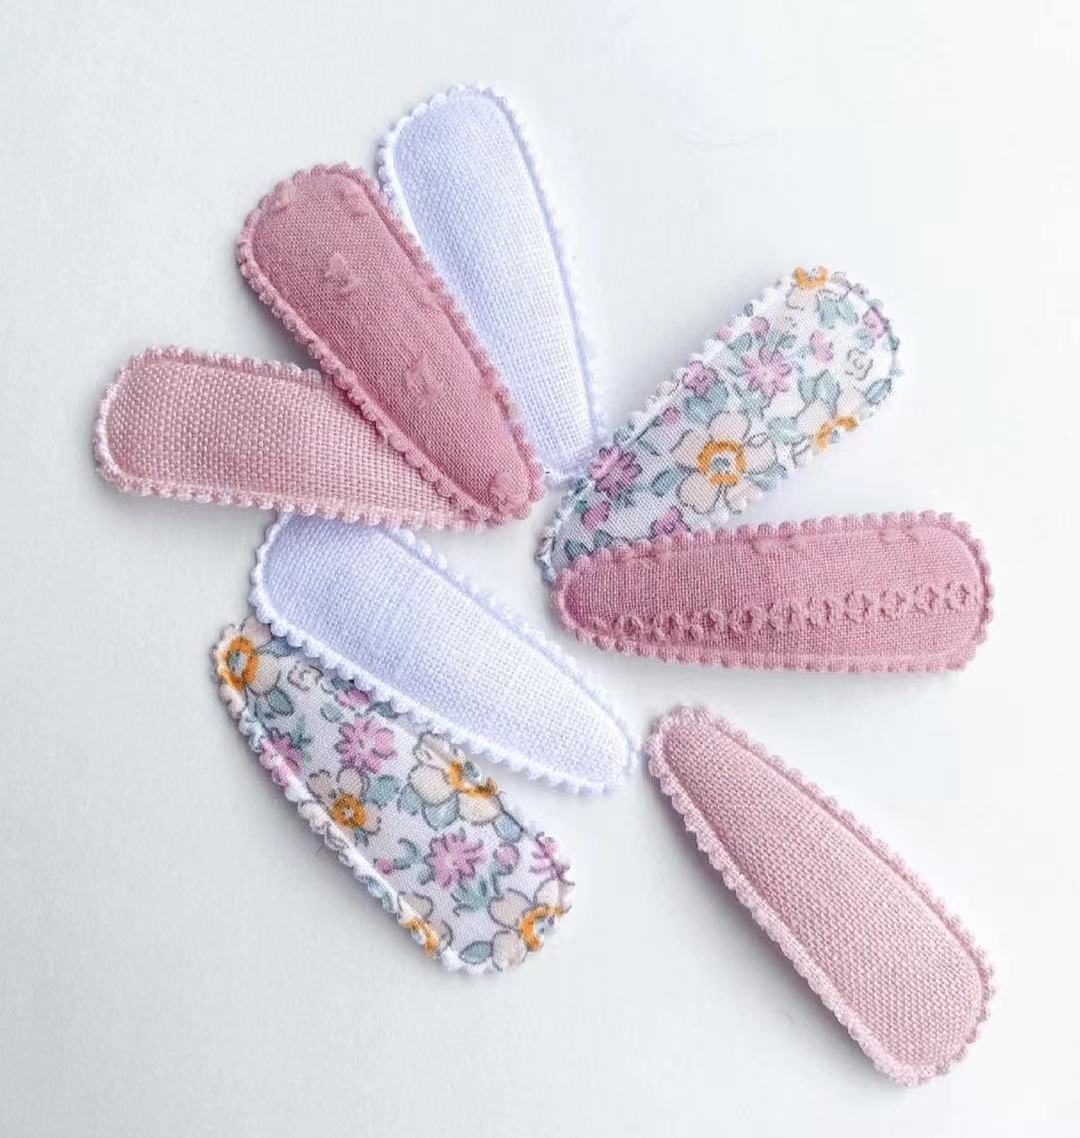 FABRIC SNAP CLIPS - PINK EMBROIDERY